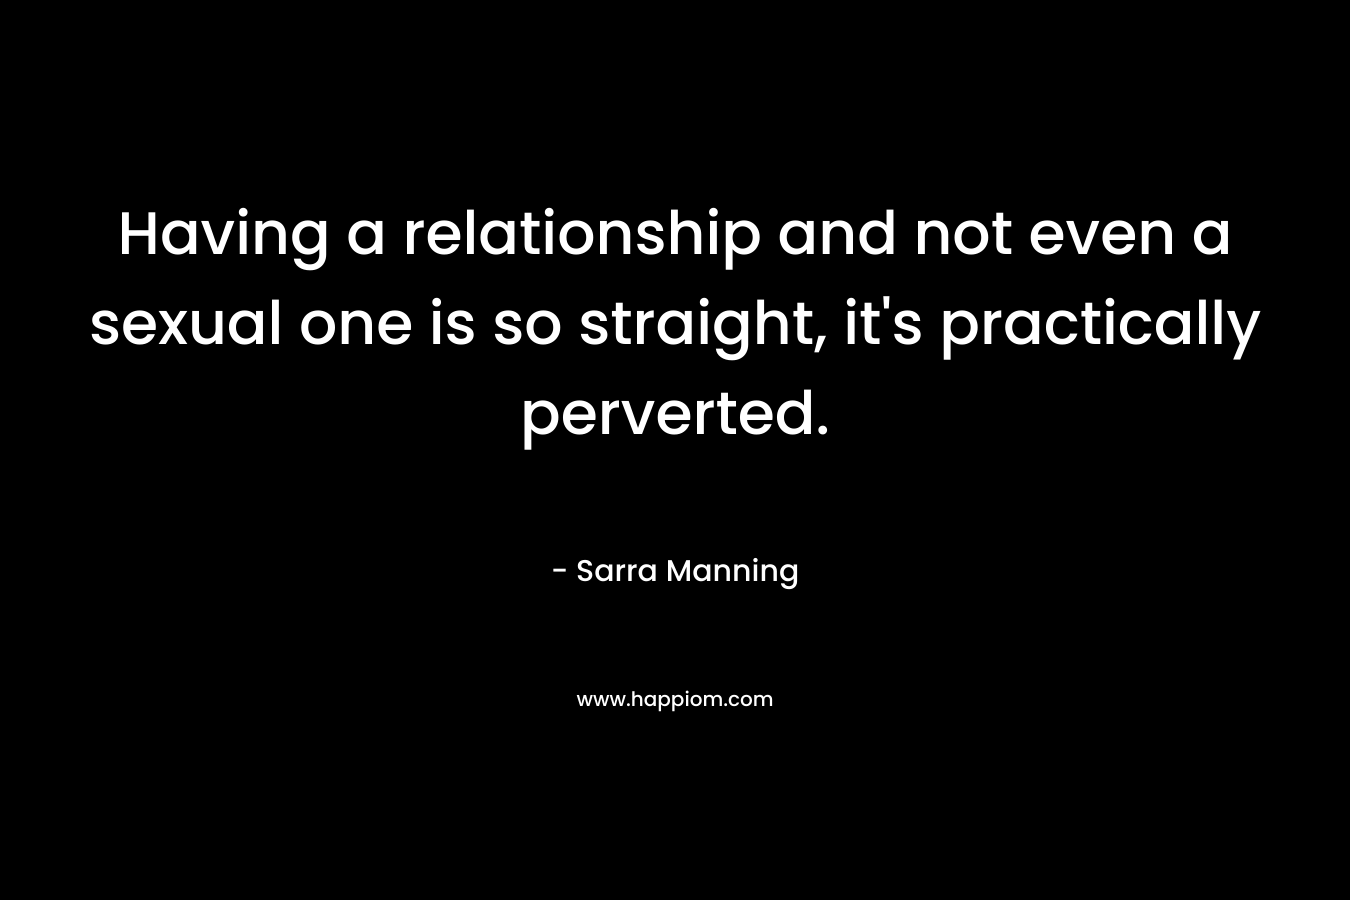 Having a relationship and not even a sexual one is so straight, it’s practically perverted. – Sarra Manning